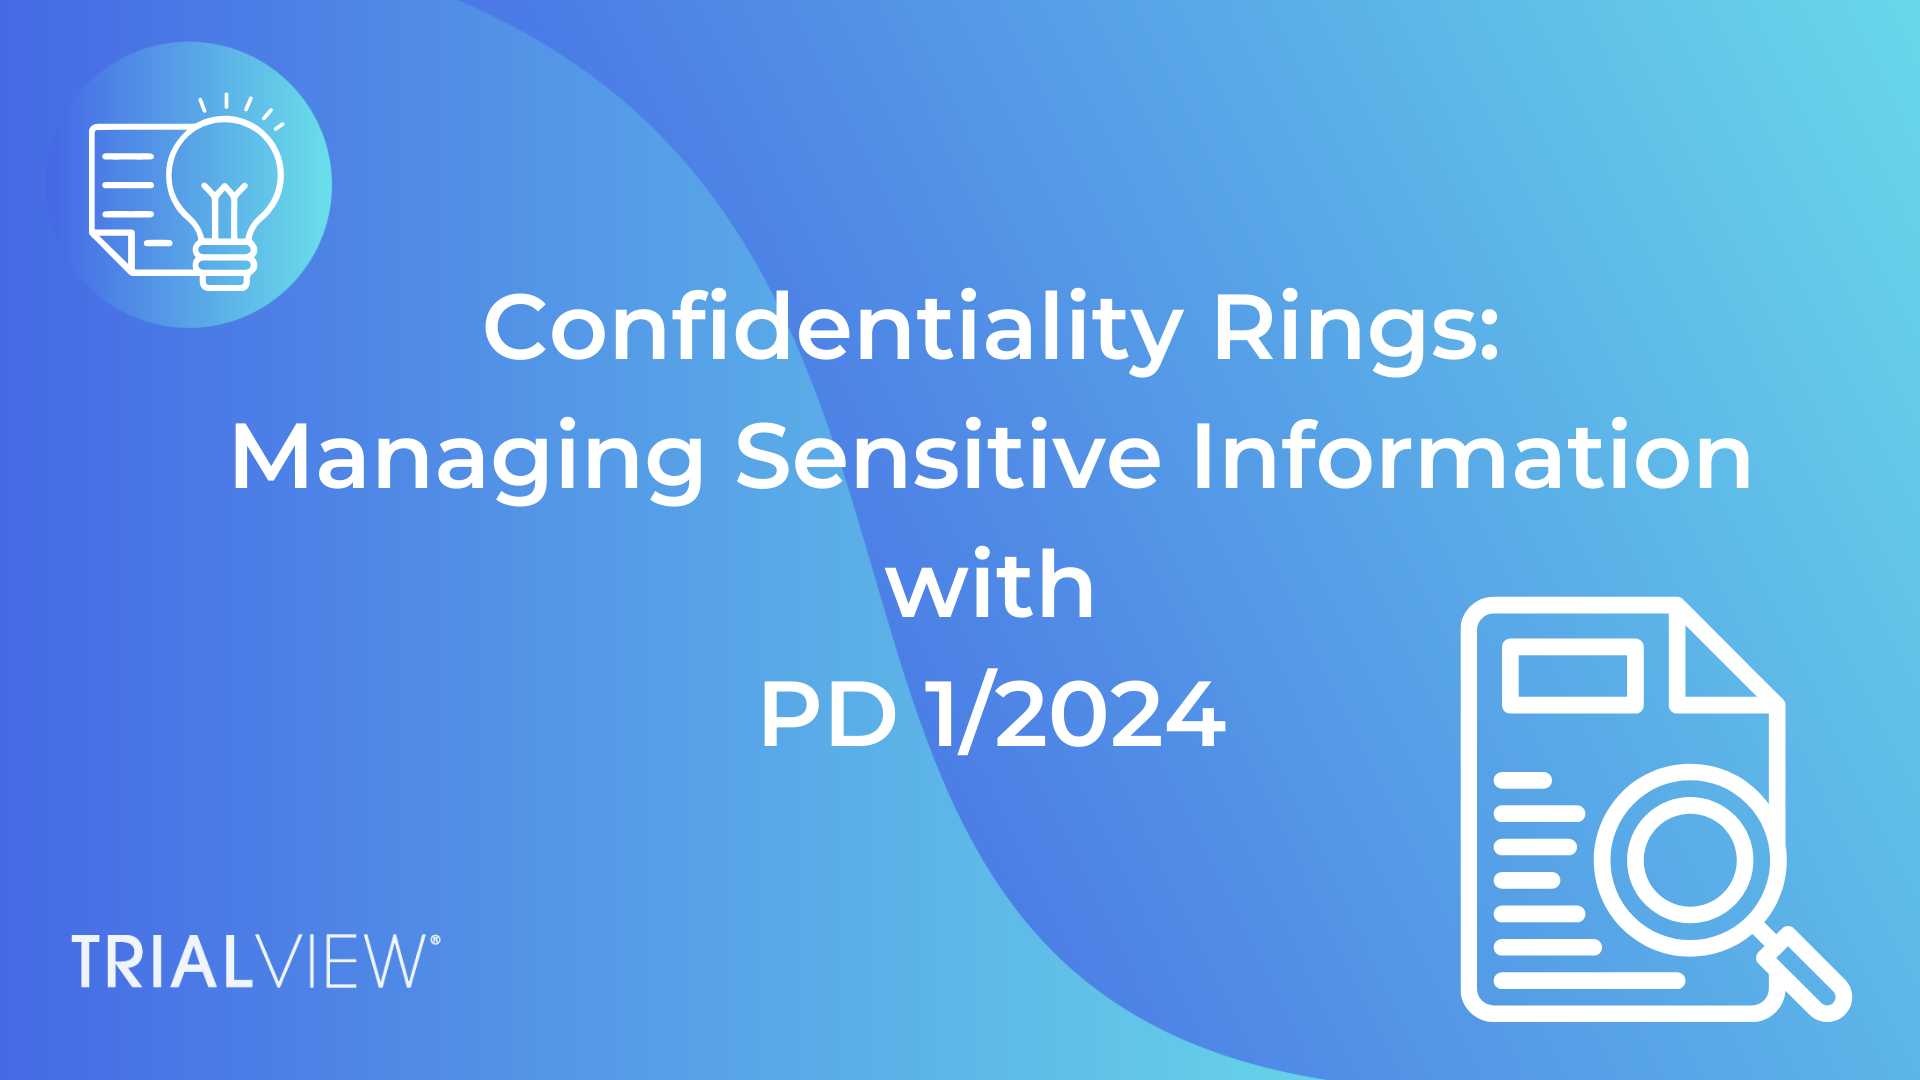 New Practice Direction on Confidentiality Rings: PD 1/2024